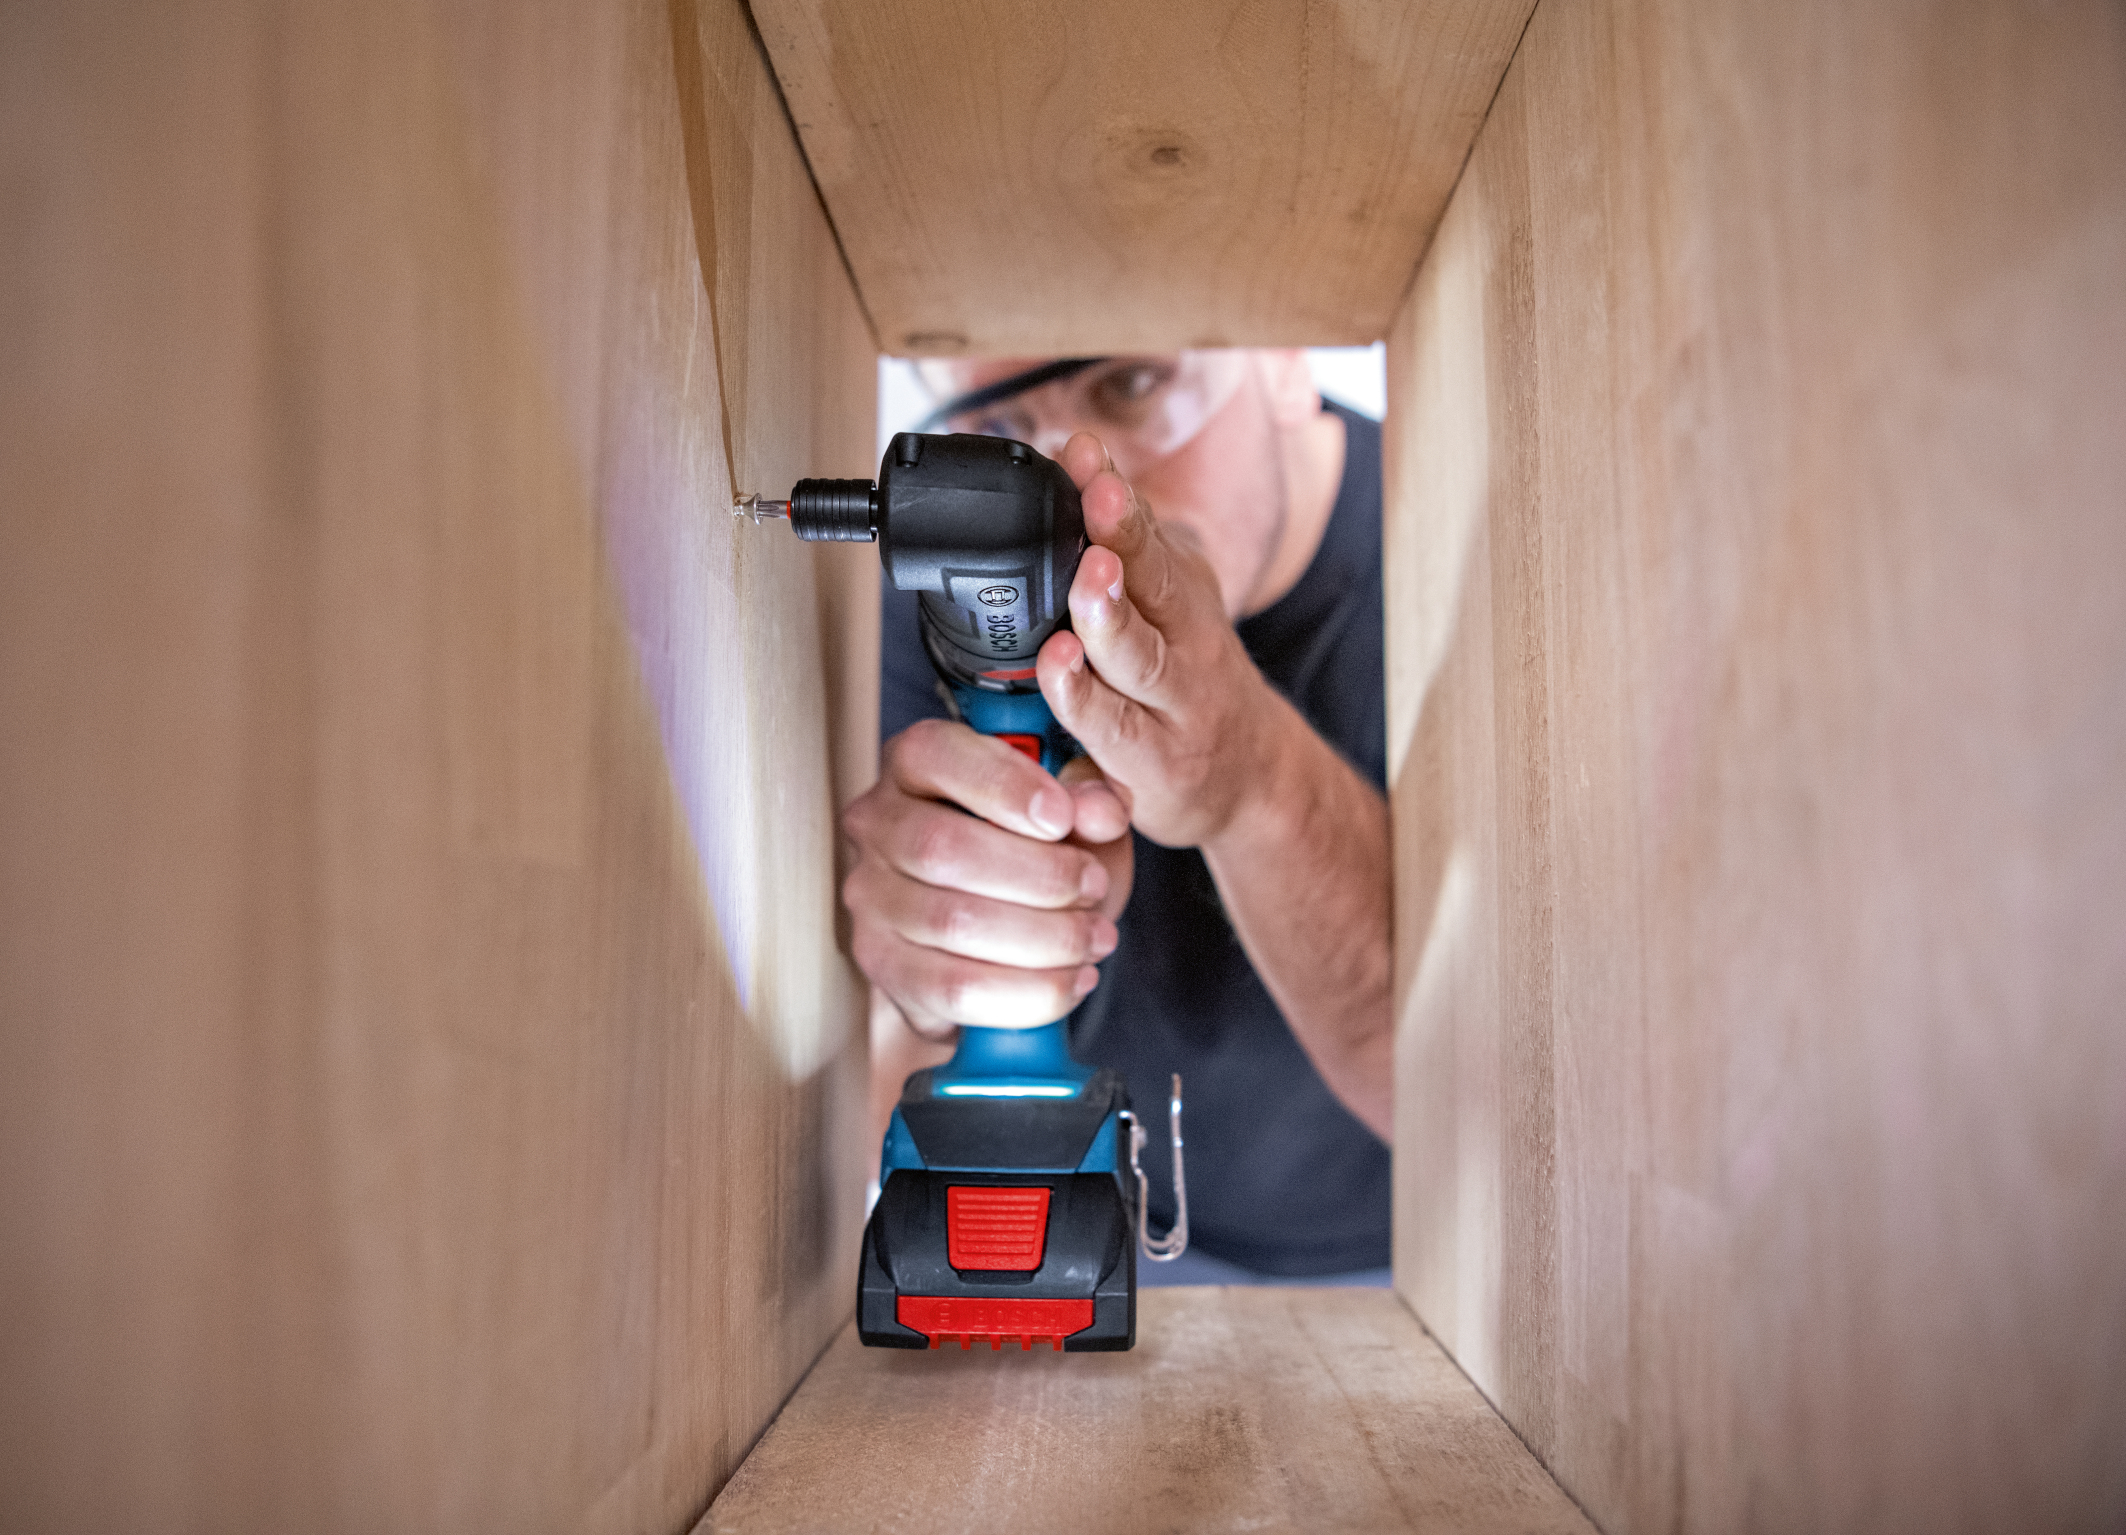 More compact: FlexiClick drill driver from Bosch with right-angle attachment